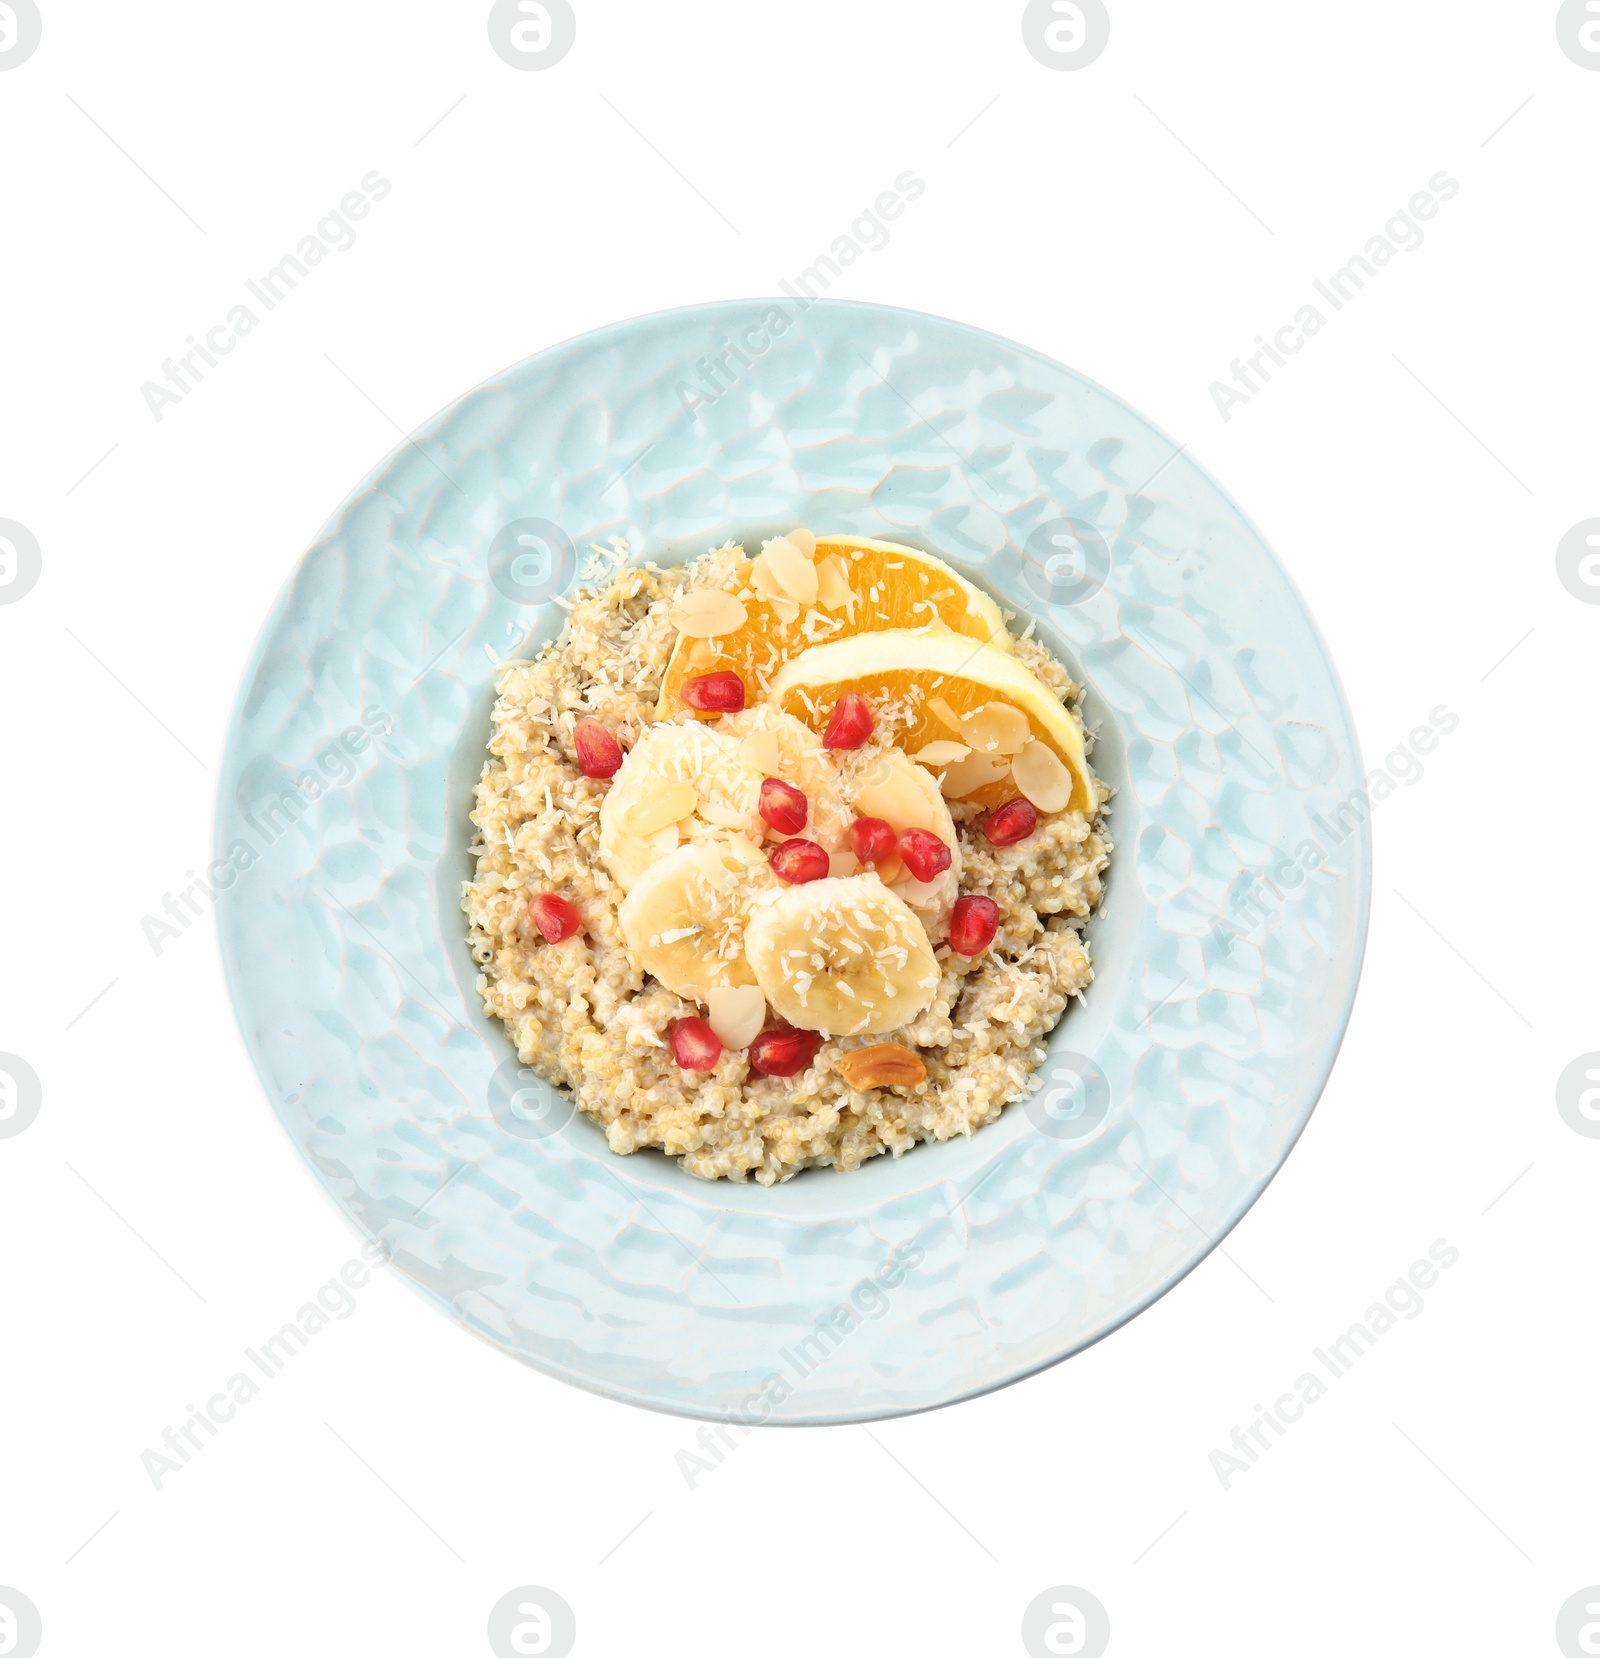 Photo of Plate of quinoa porridge with orange, banana and pomegranate seeds on white background, top view